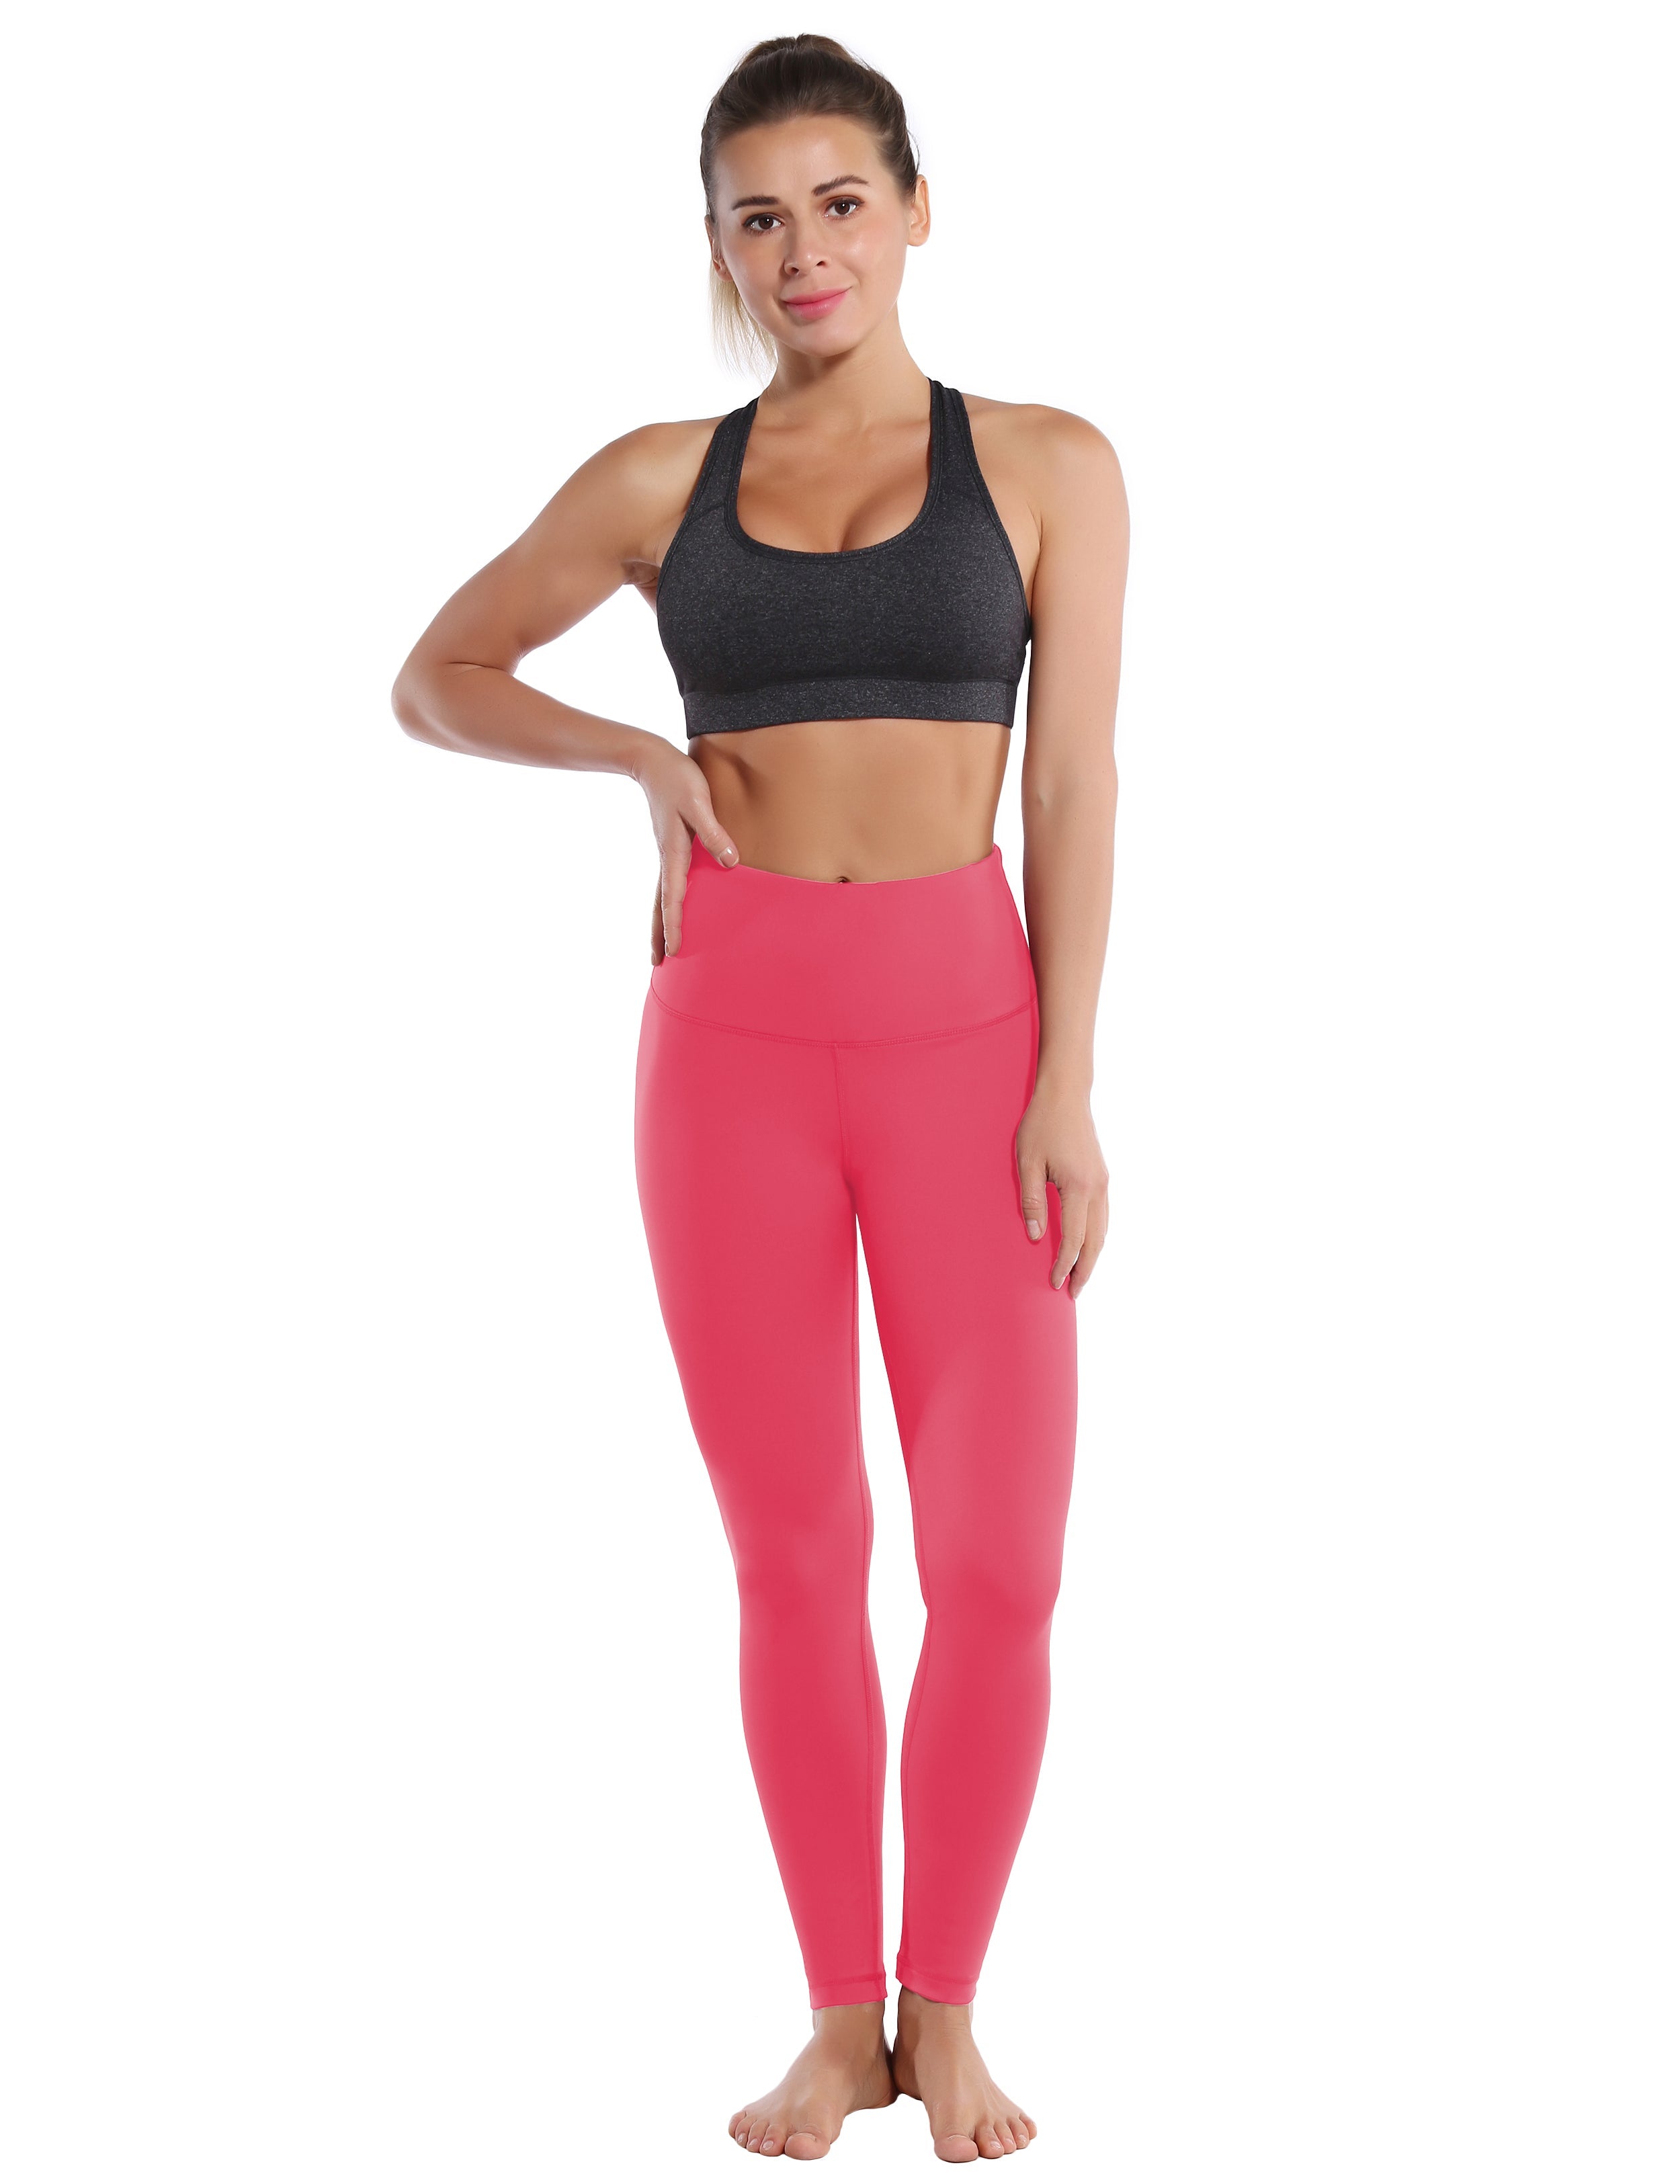 High Waist Jogging Pants rosecoral 75%Nylon/25%Spandex Fabric doesn't attract lint easily 4-way stretch No see-through Moisture-wicking Tummy control Inner pocket Four lengths